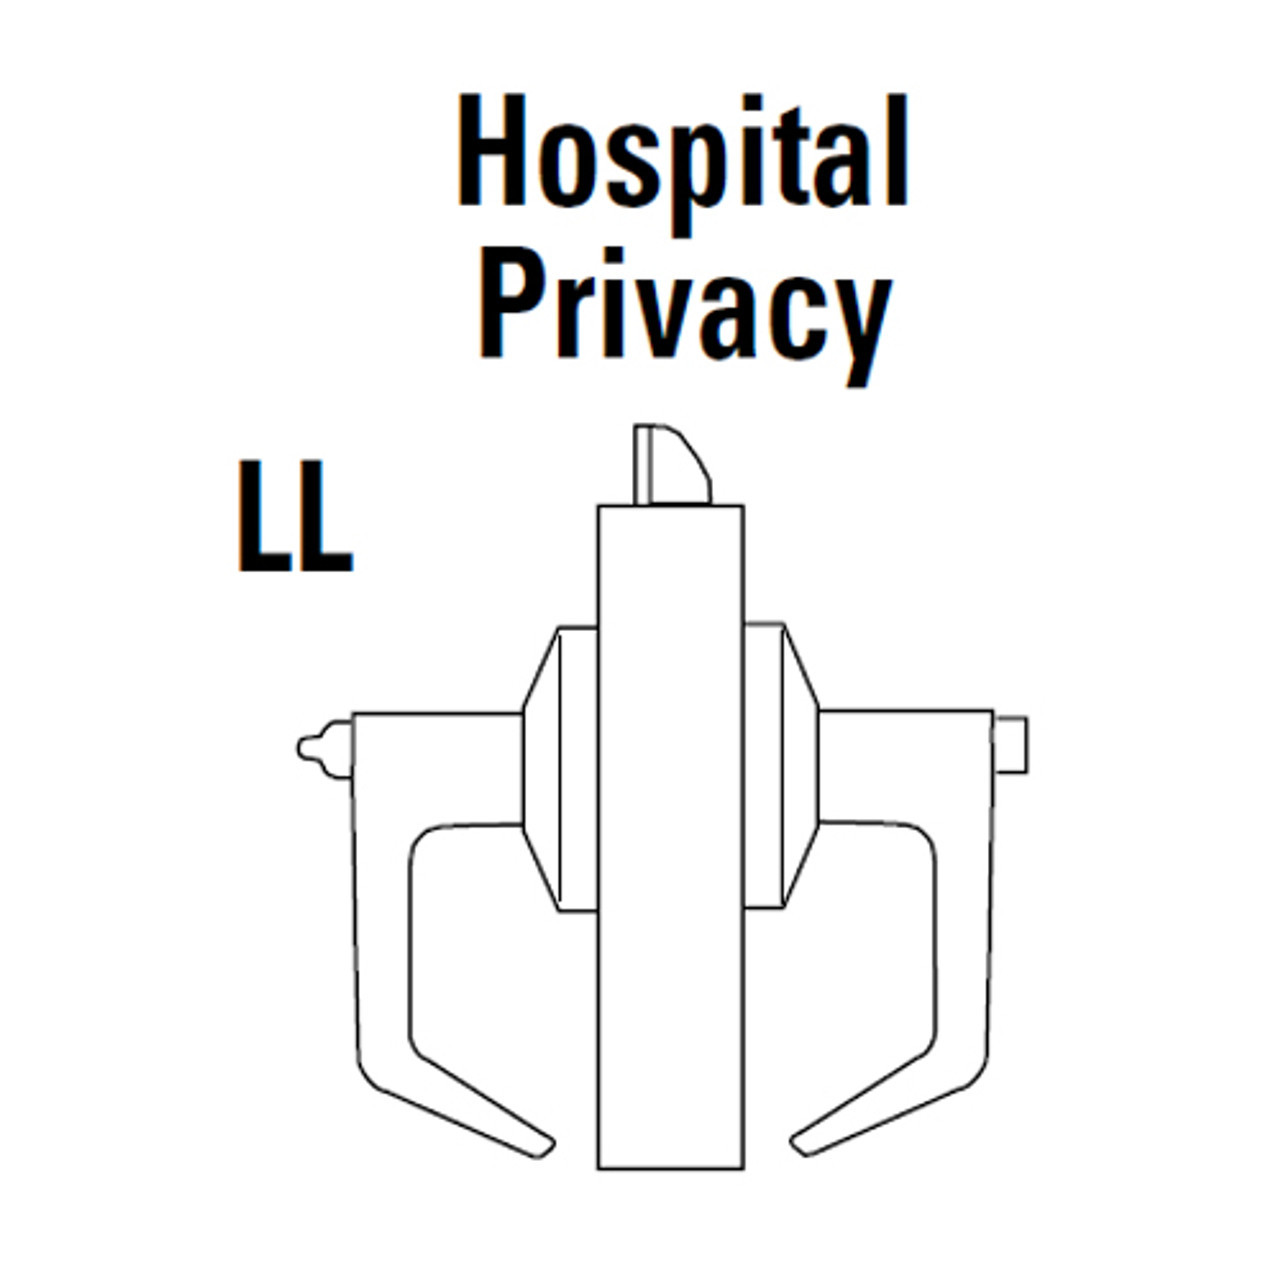 9K30LL15KS3618LM Best 9K Series Hospital Privacy Heavy Duty Cylindrical Lever Locks with Contour Angle with Return Lever Design in Bright Nickel